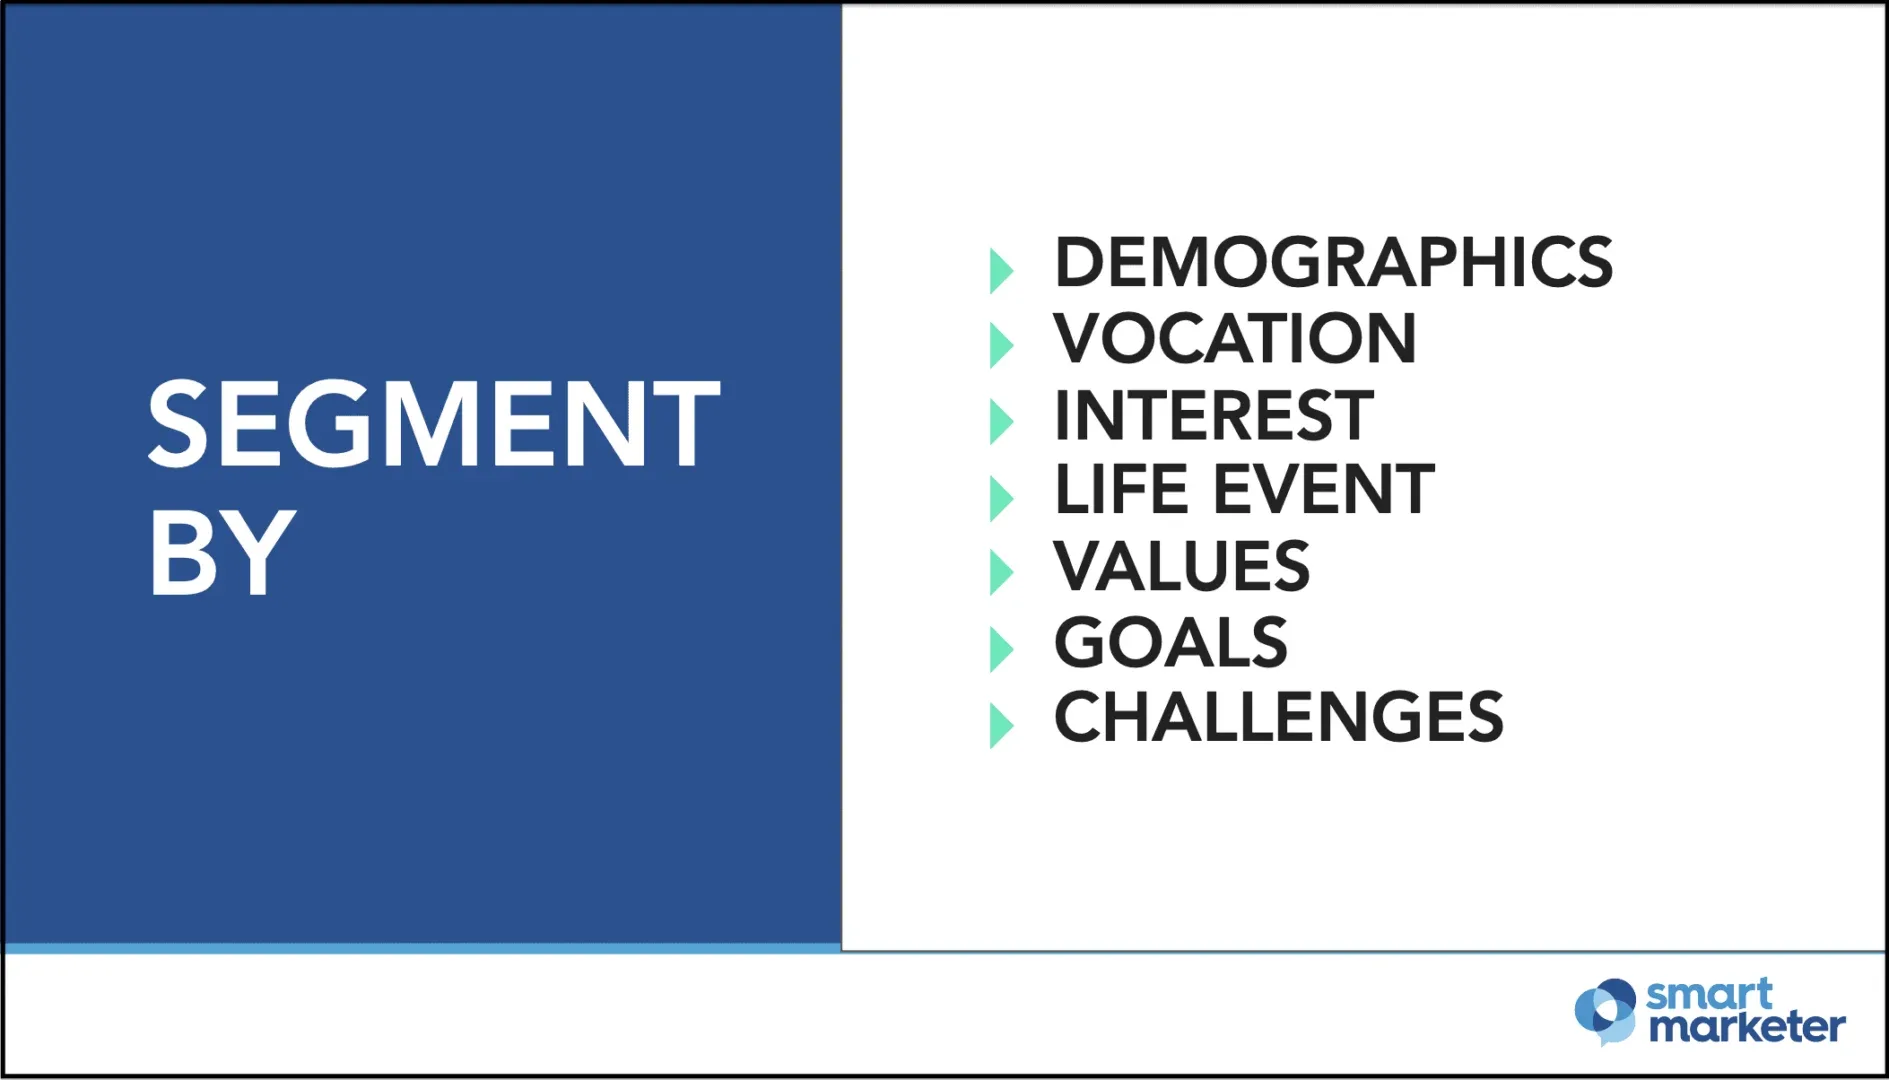 A digital image with "Segment by" on the left and a list on the right that says "Demographics, vocation, interest, life event, values, goals, challenges".